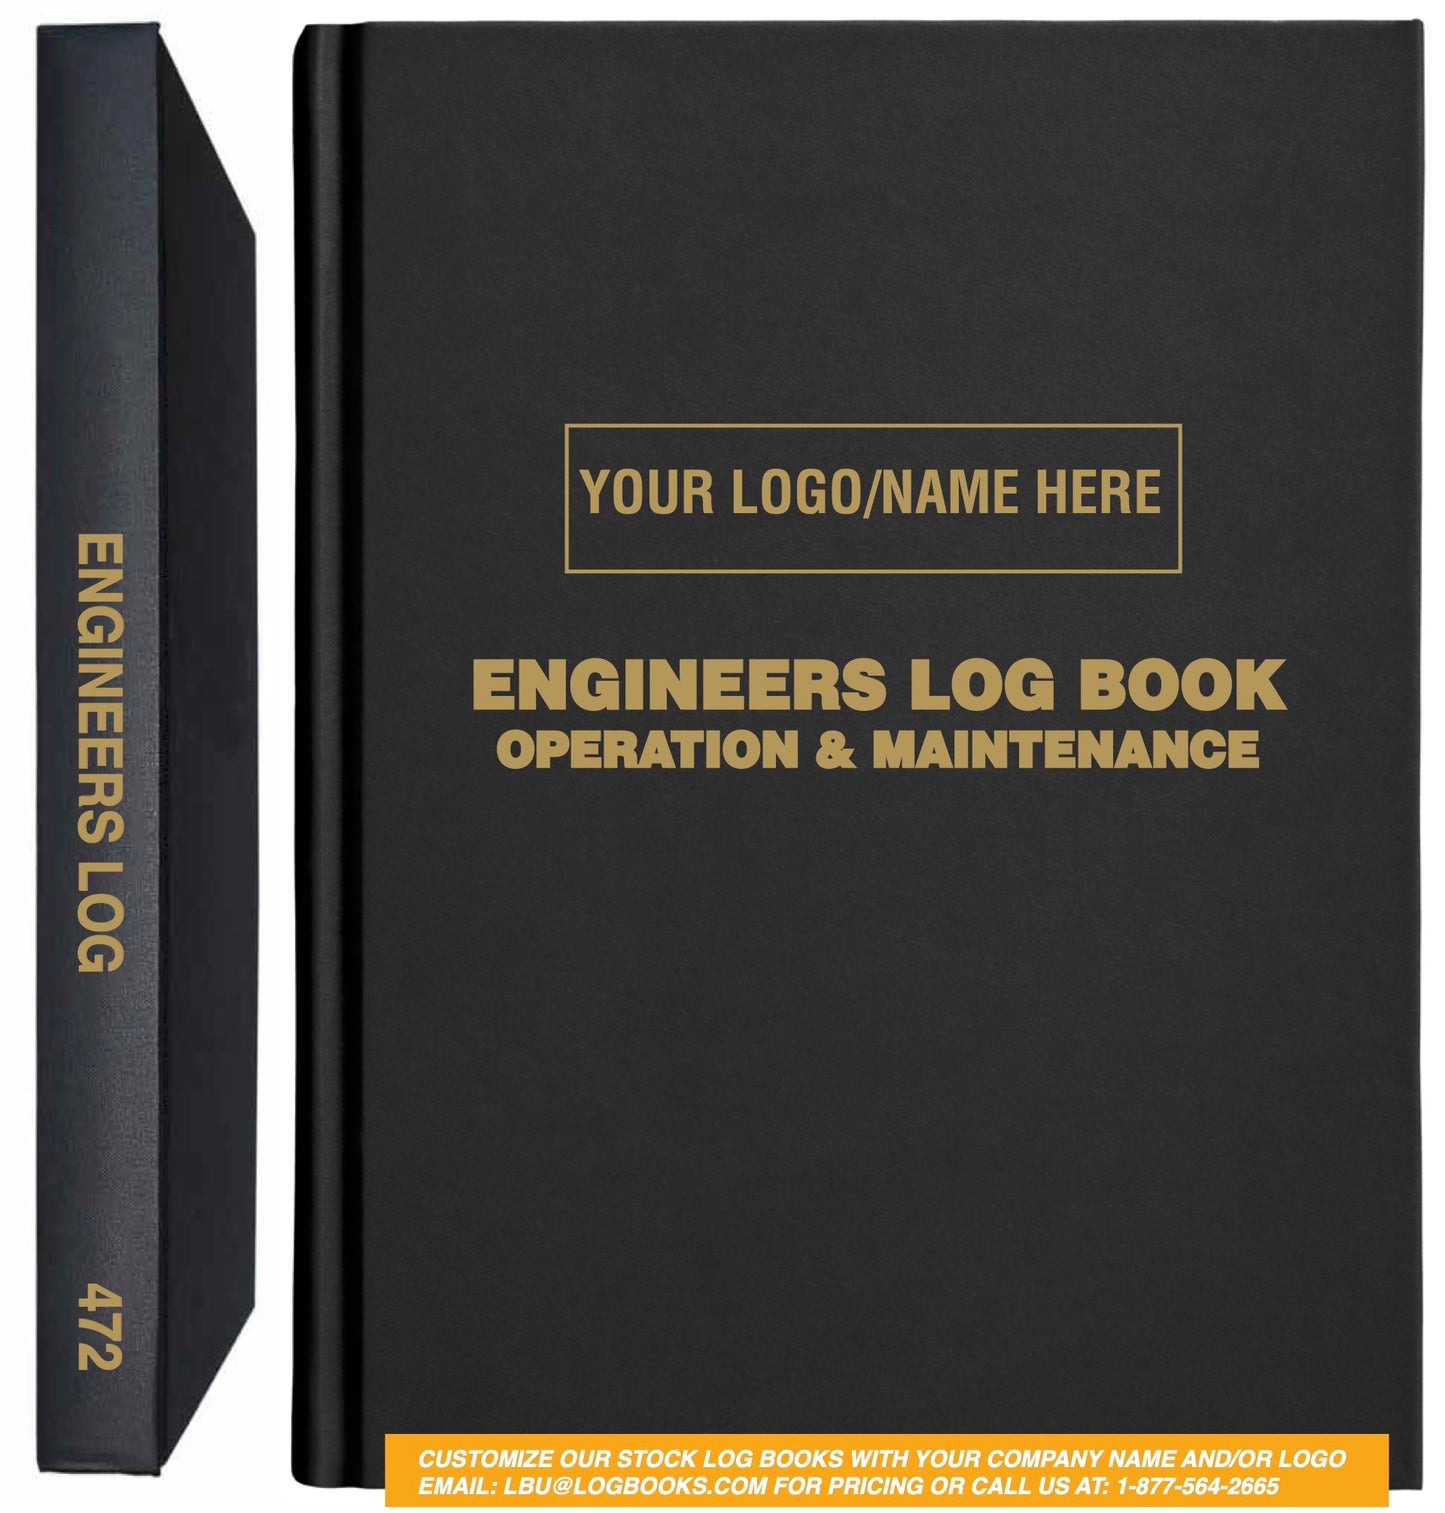 Engineers (2 Shifts per page) Log Book #472